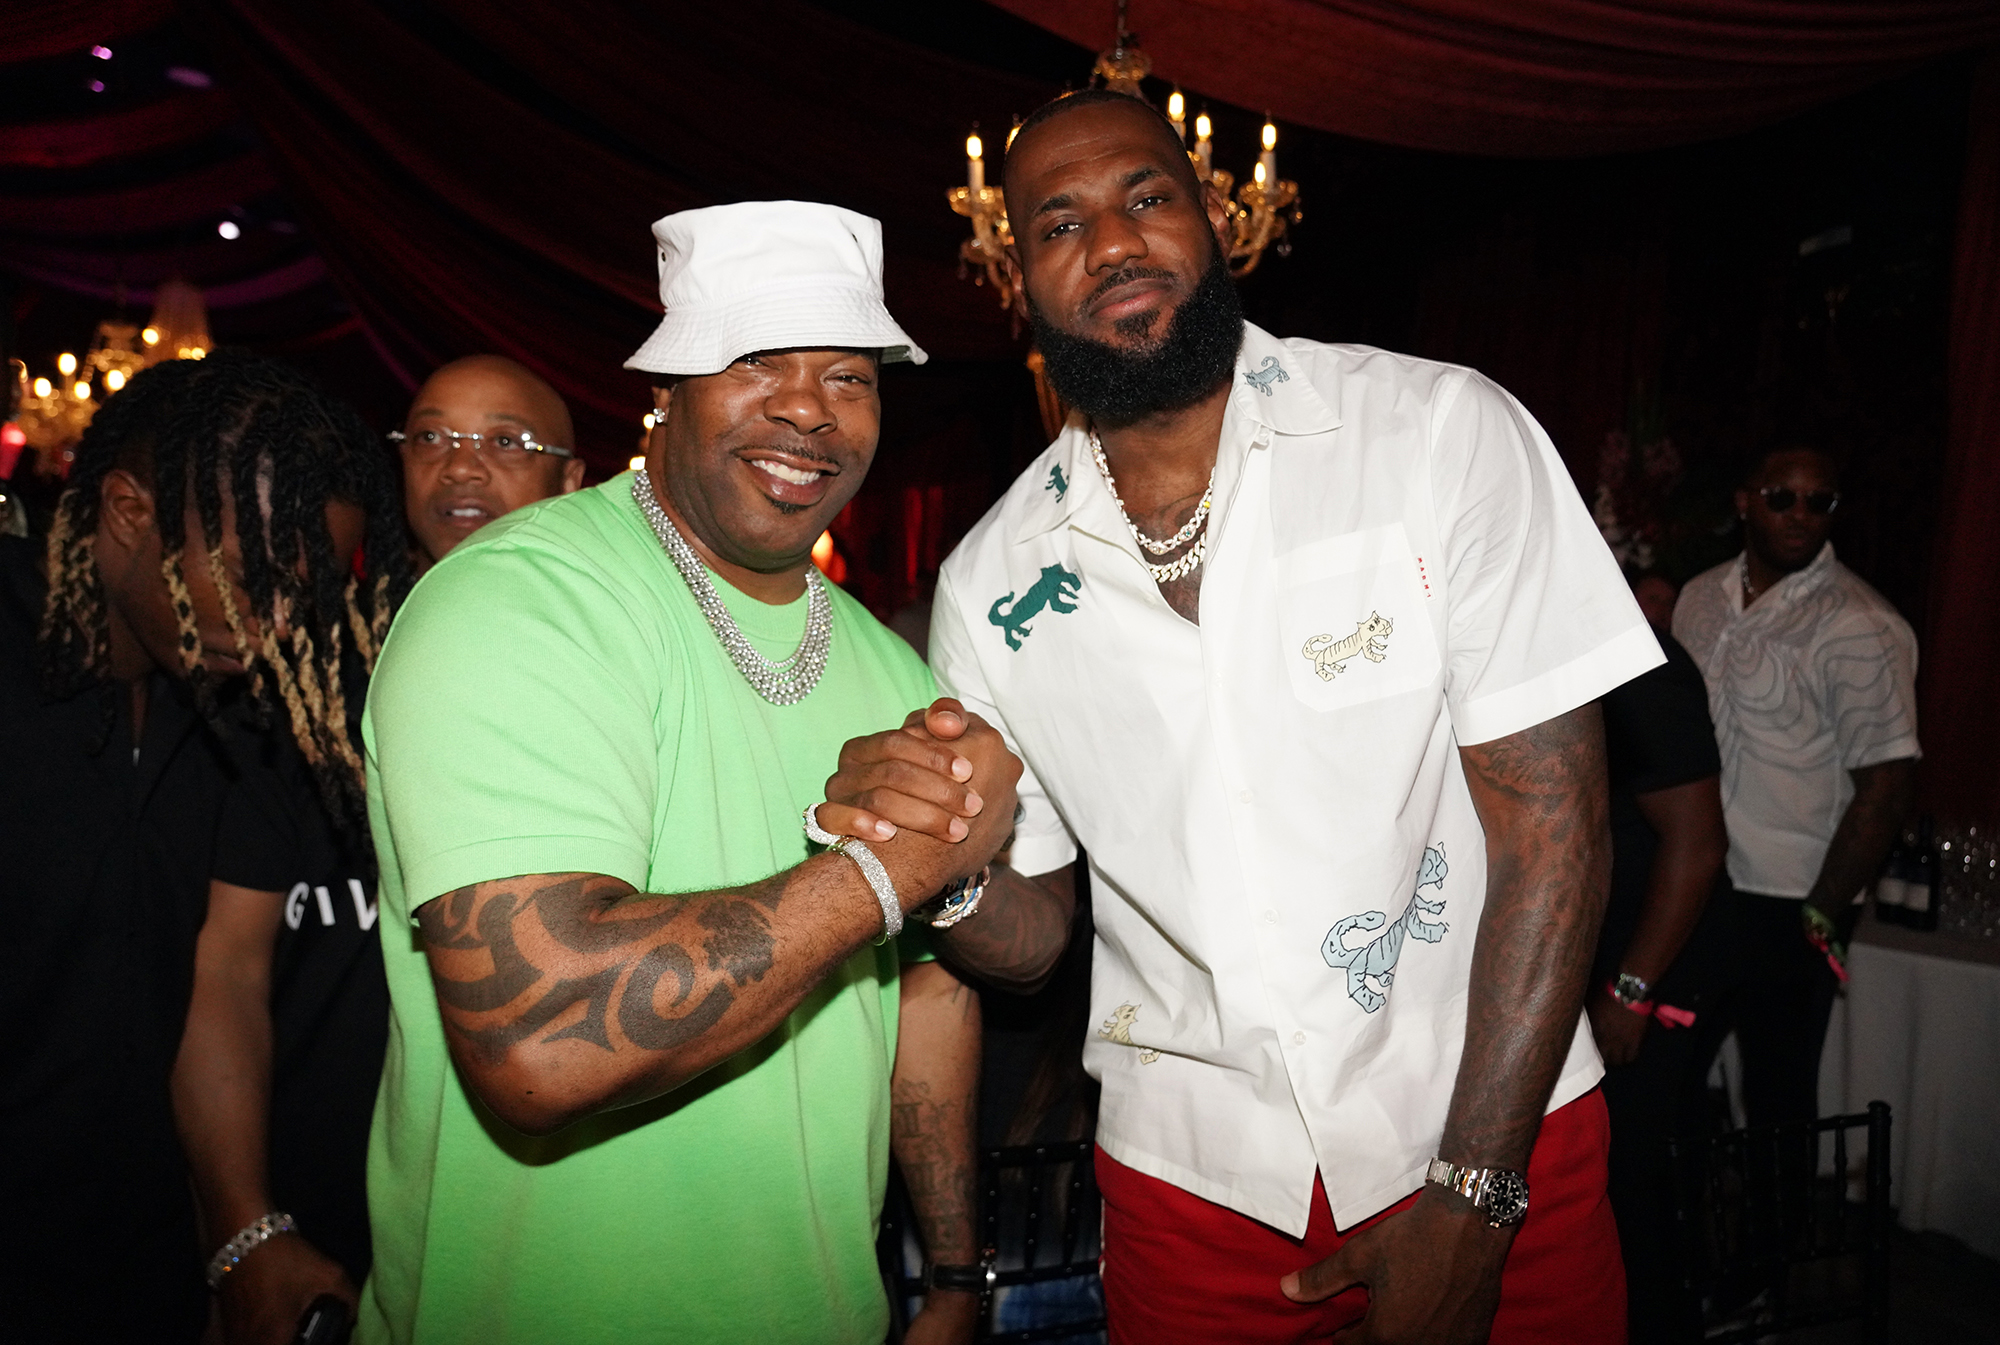 LeBron James and Busta Rhymes